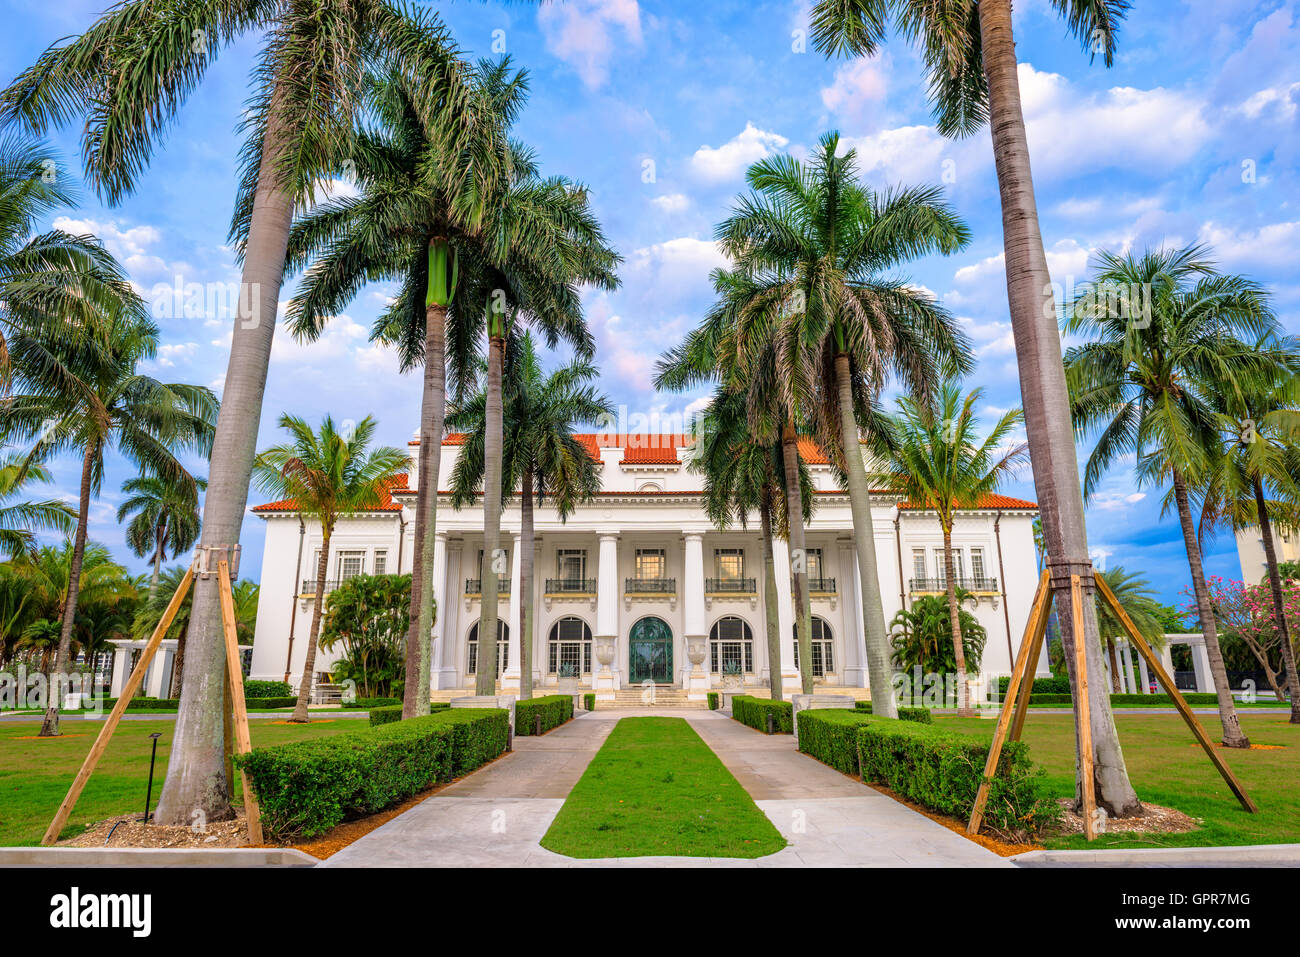 The Flagler Museum in West Palm Beach, Florida, USA. Stock Photo